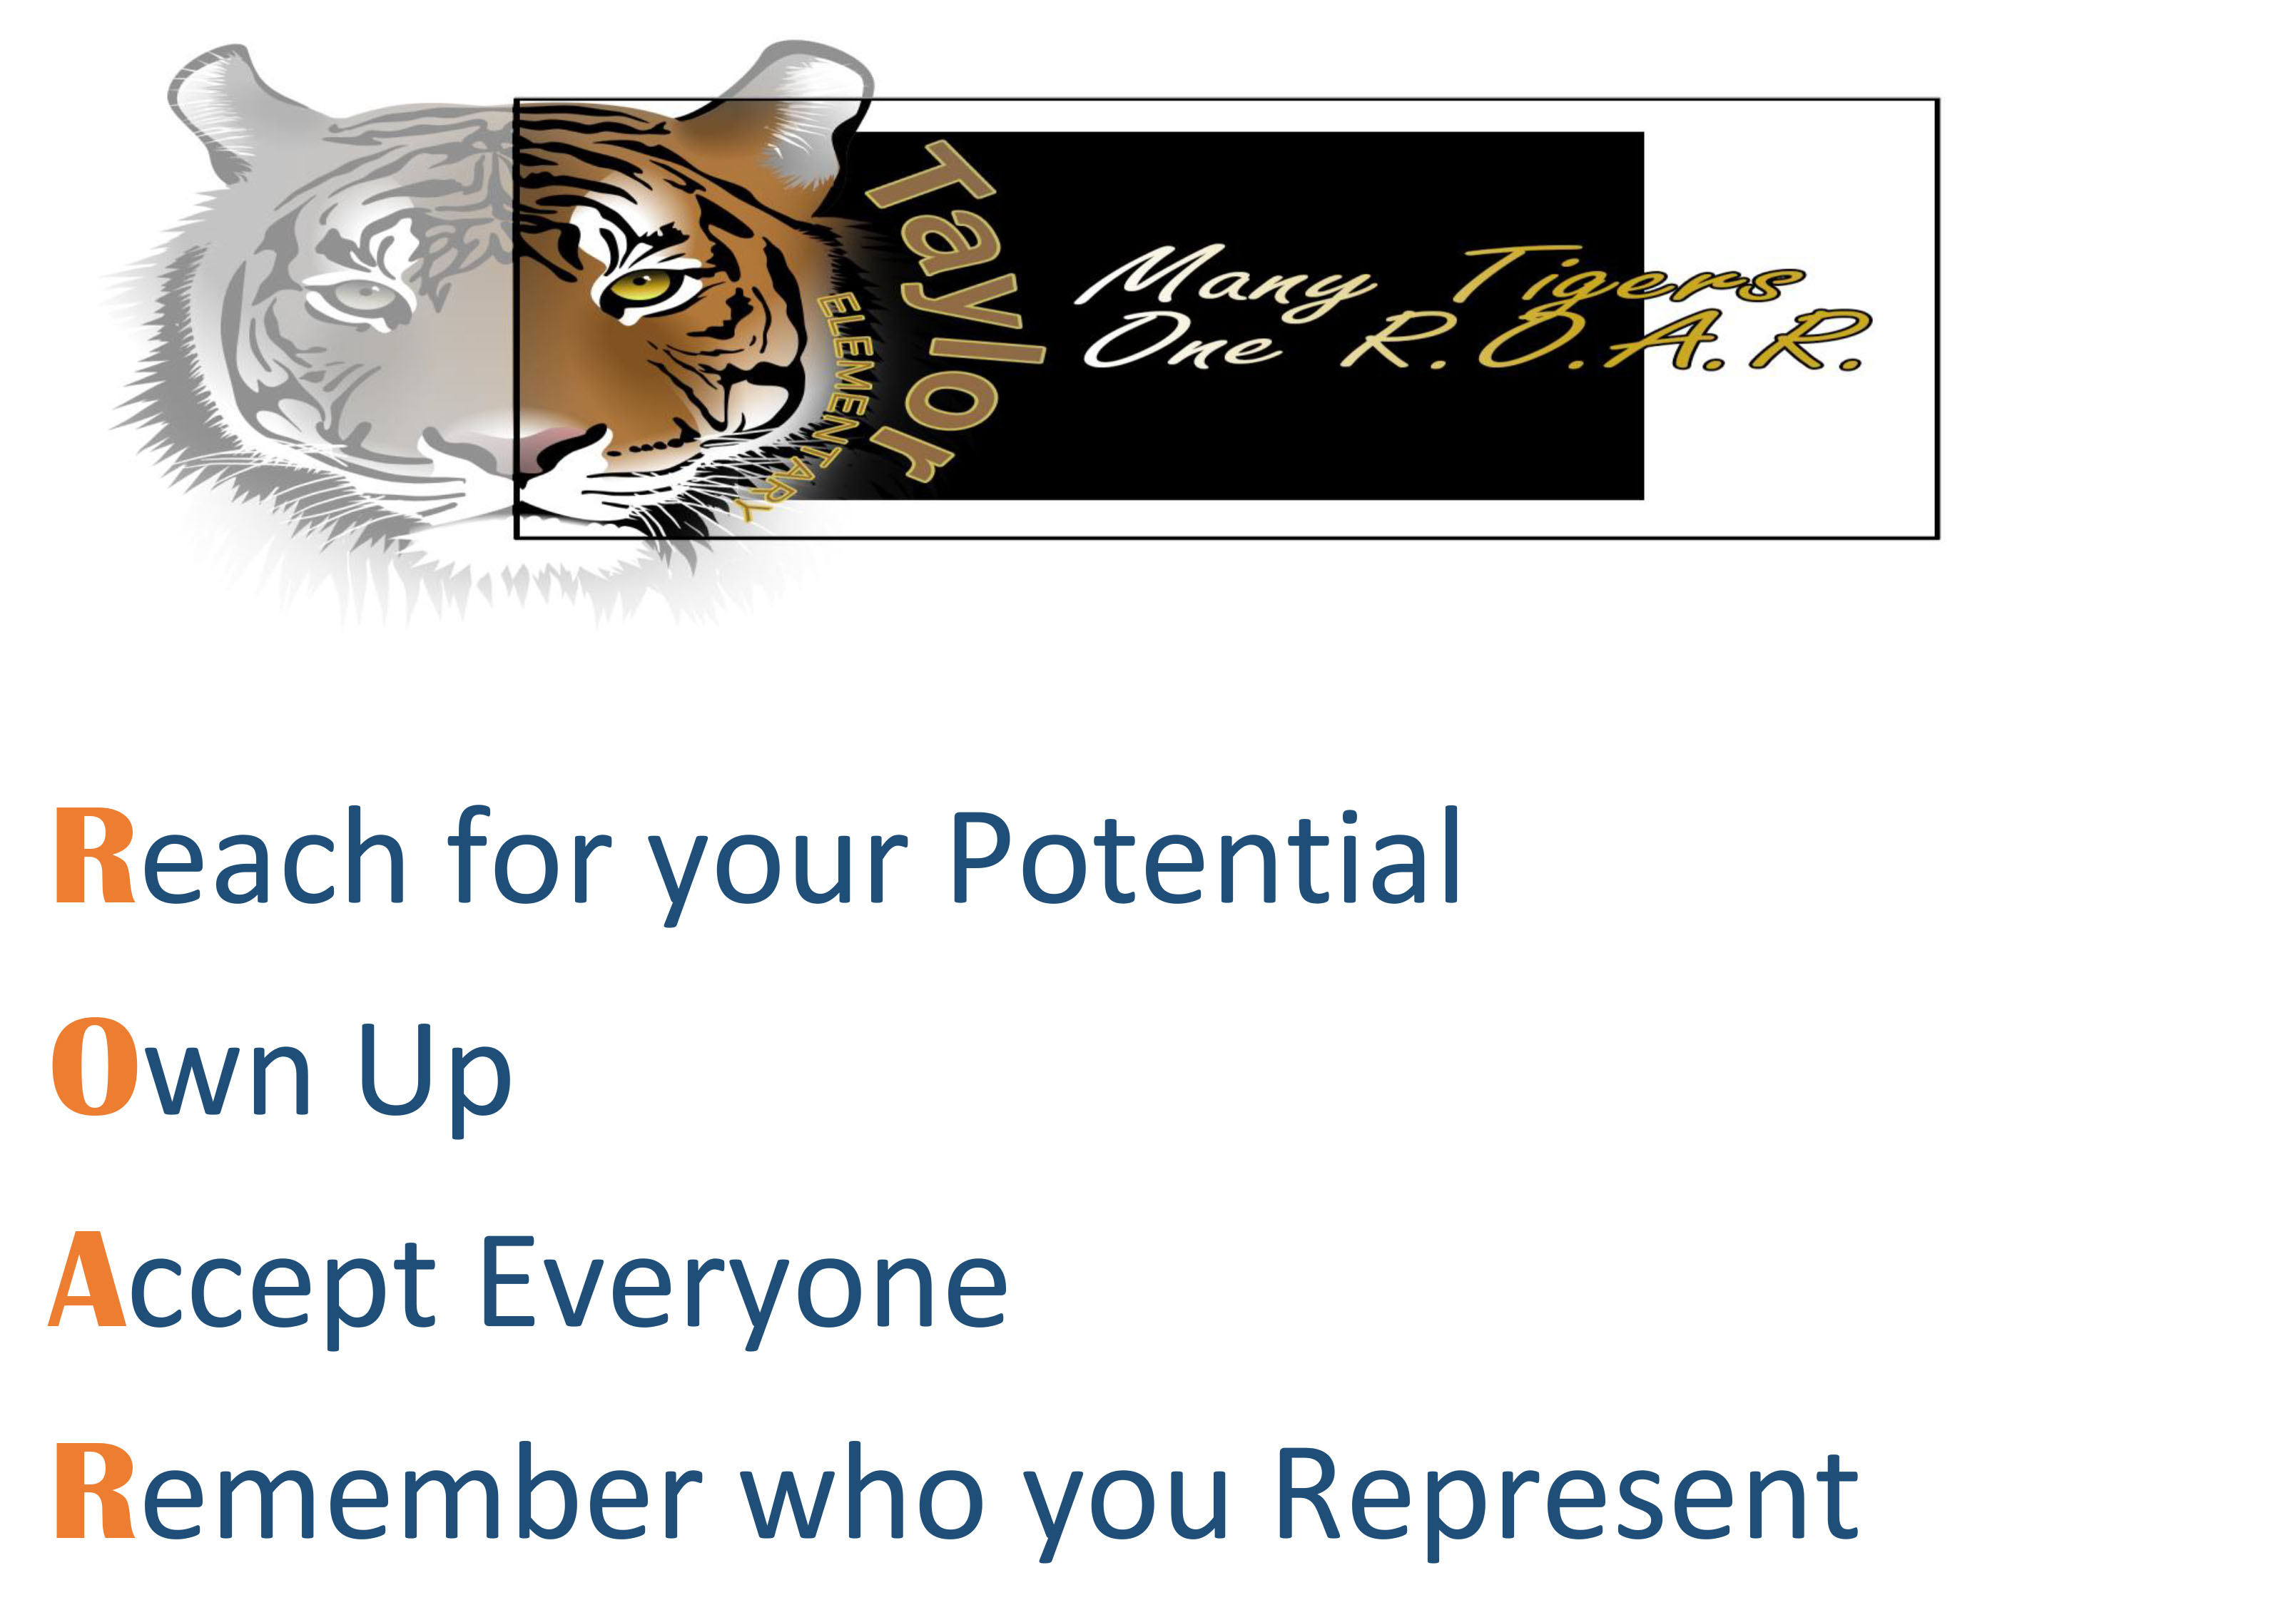 Reach your potential, Own up, Accept Everyone, Remember who you represent